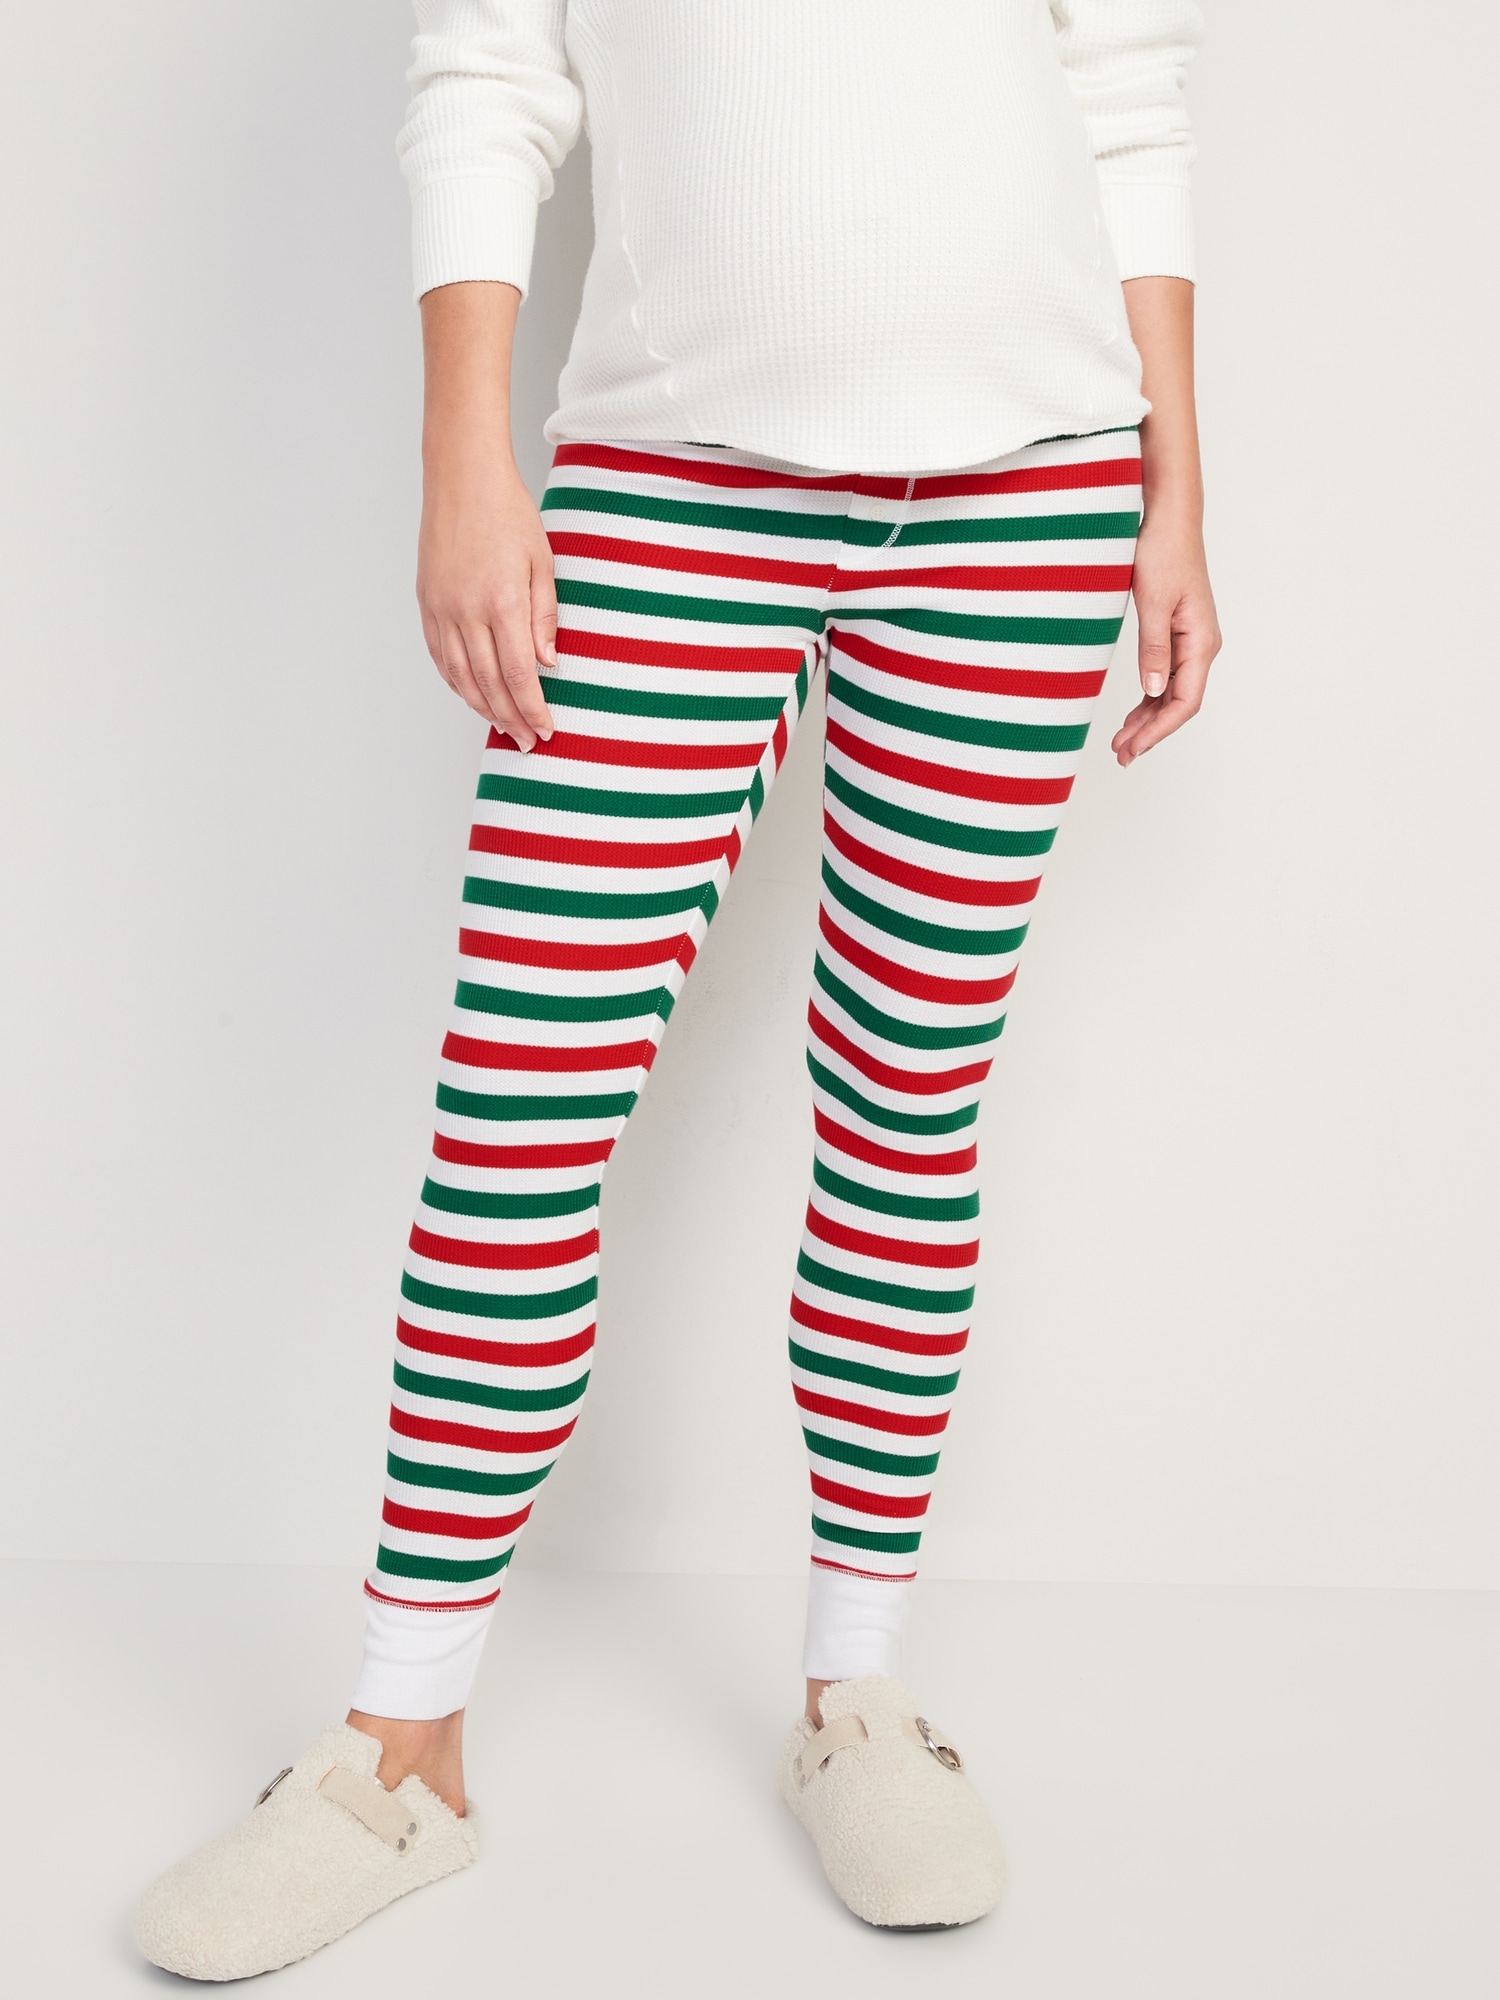 Elf Christmas Leggings for Women, Red Green Striped Ugly Holiday Costu –  Starcove Fashion